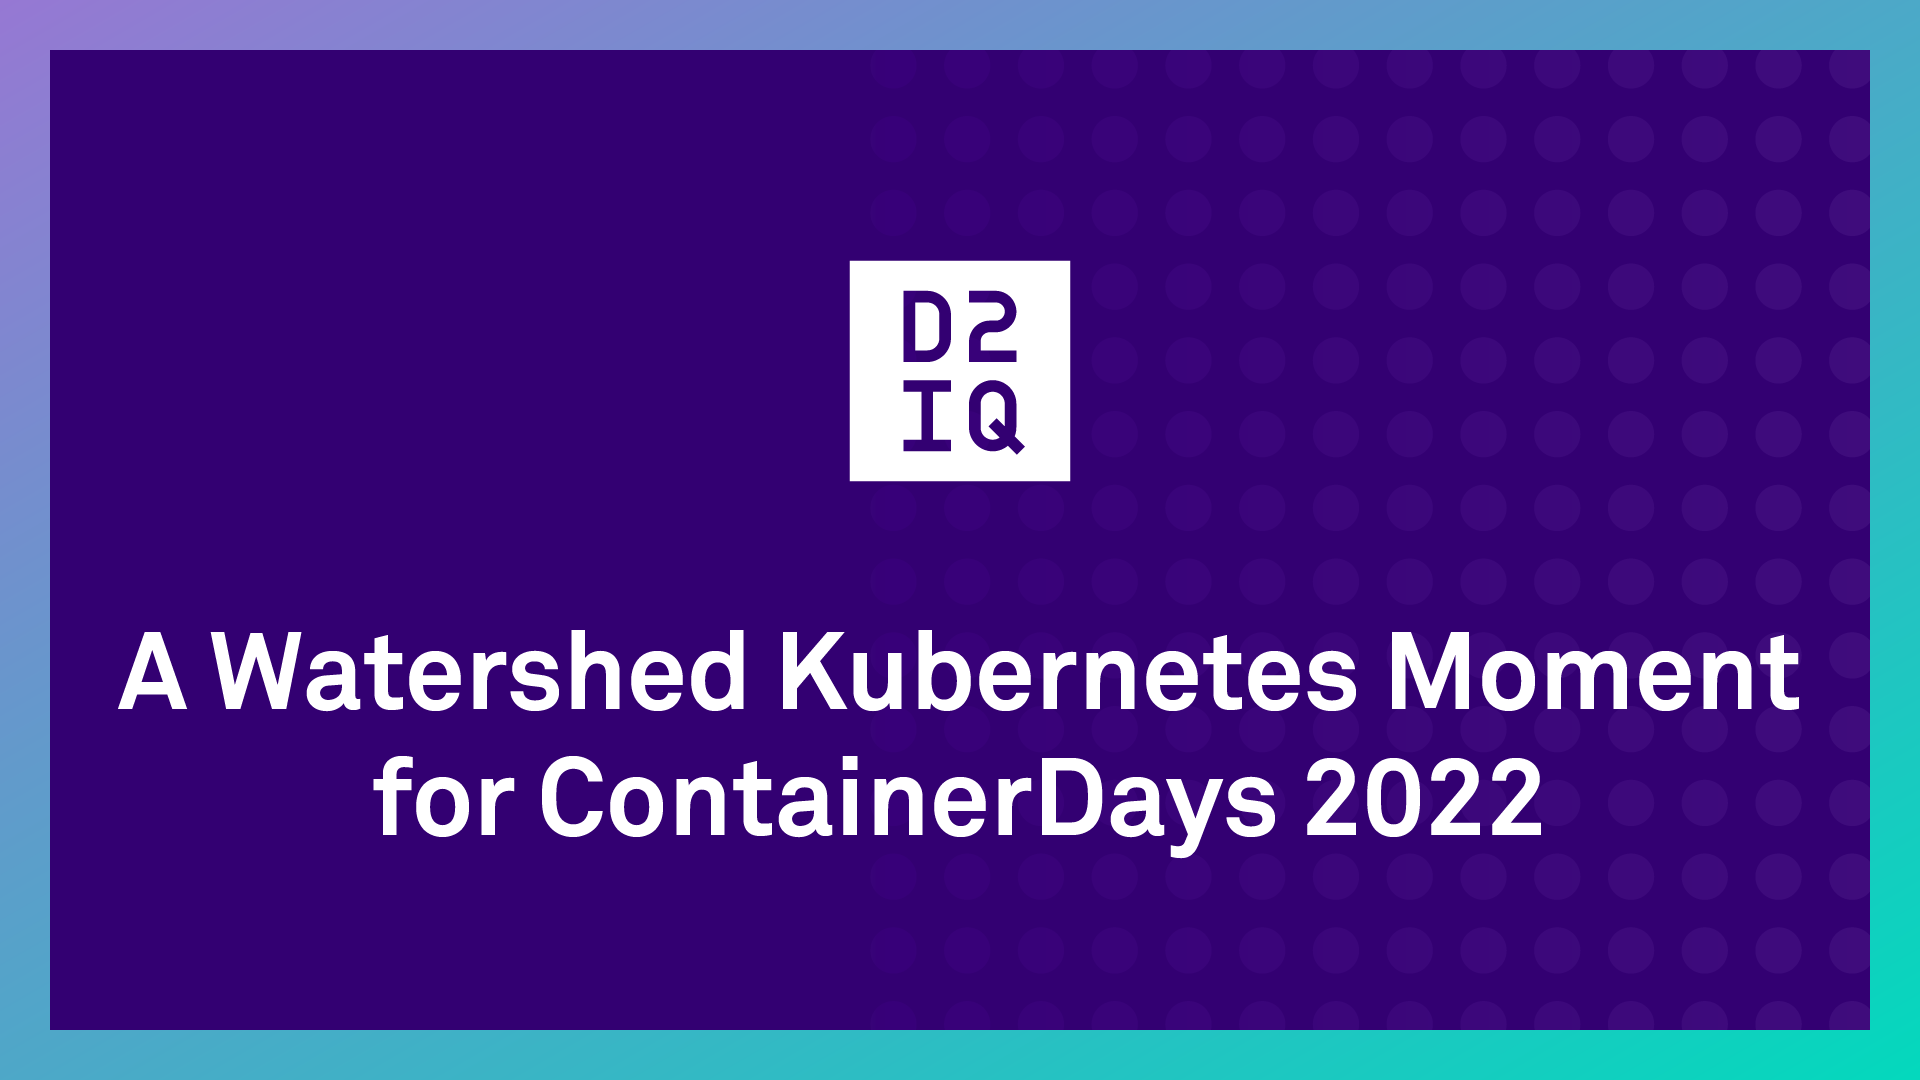 A Watershed Kubernetes Moment for ContainerDays 2022